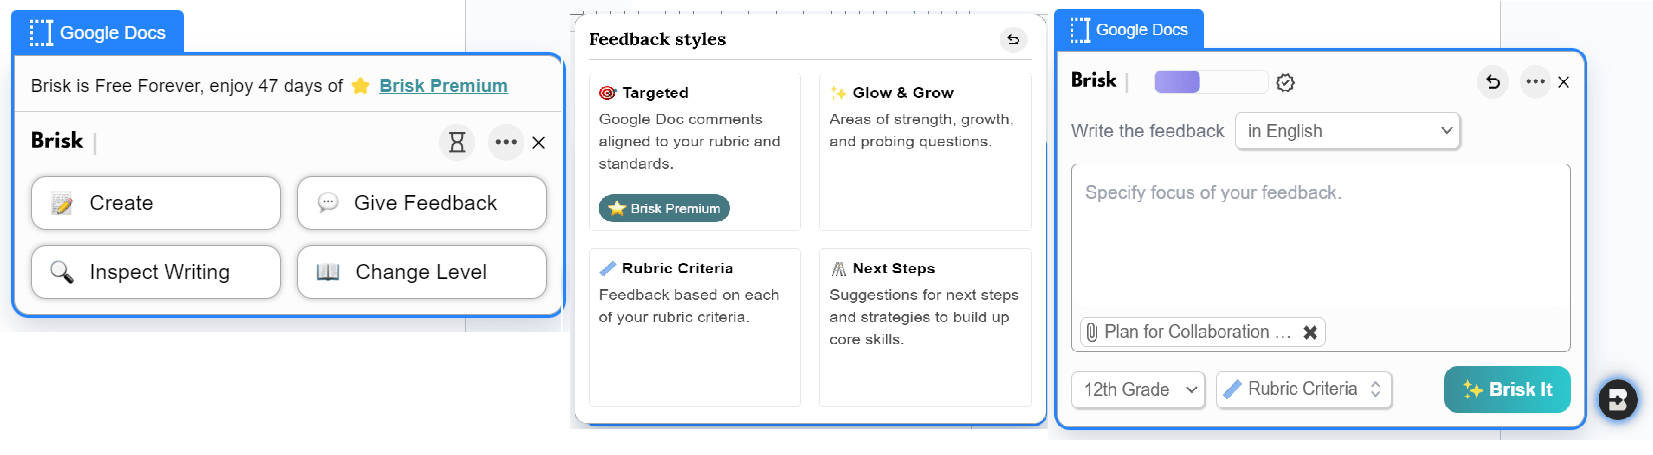 Brisk menus in Google Docs: 1) Options for create, give feedback, inspect writing, and change level. 2) Feedback styles: targeted, rubric grading, glow and grow, next steps 3) option for feedback language, grade, and an uploaded rubric with a Brisk It button